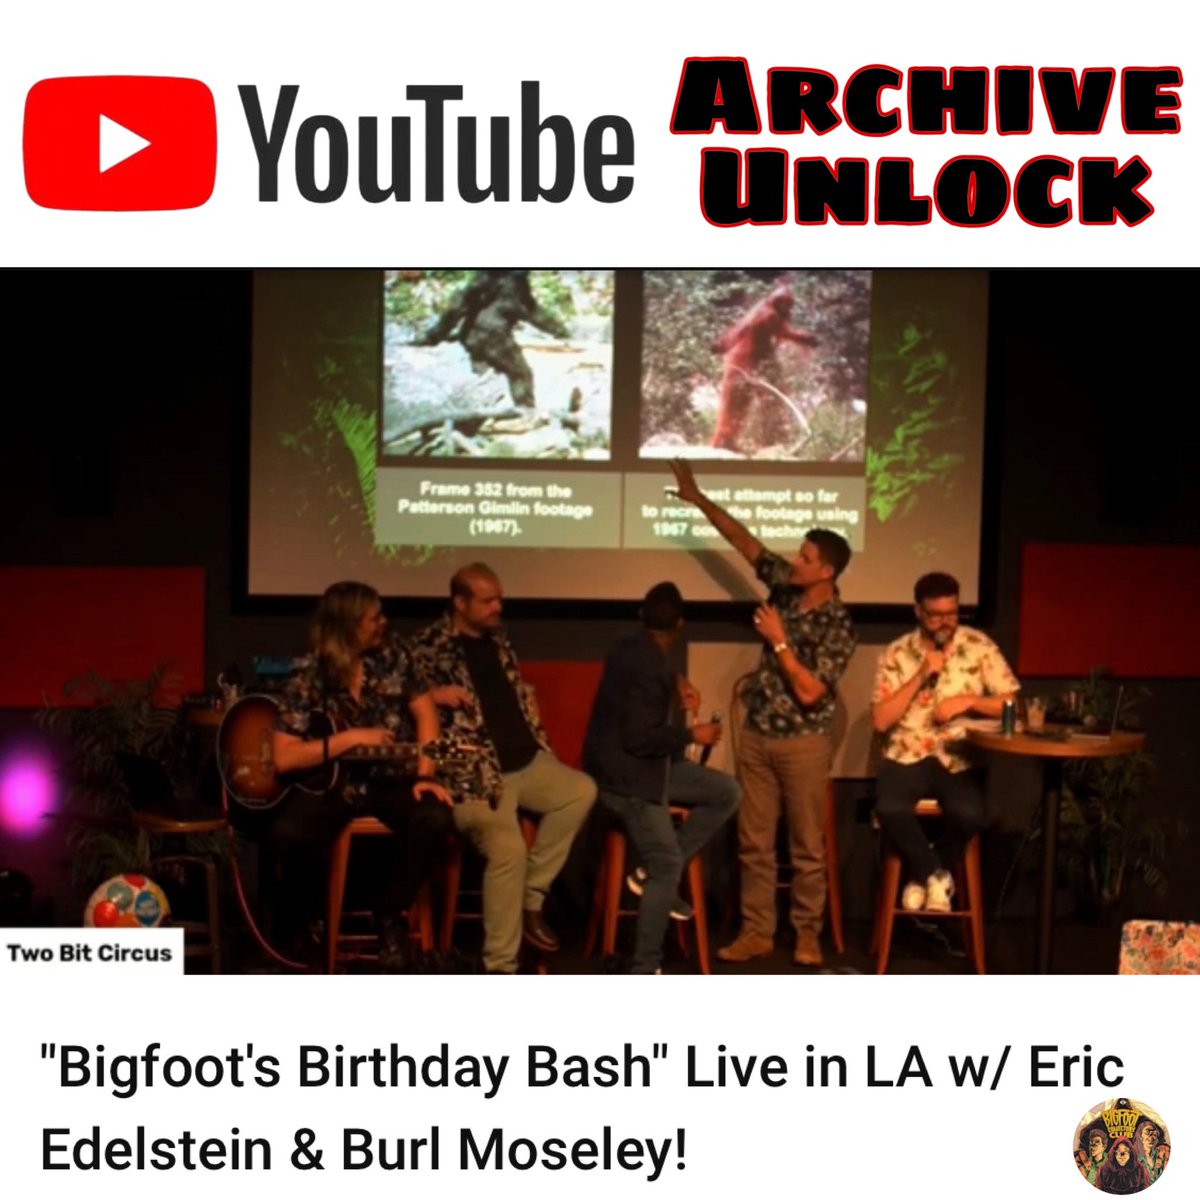 Just dropped our Live Show from LA last August on our YouTube Channel! m.youtube.com/watch?v=7wTA20… @BryceOJohnson